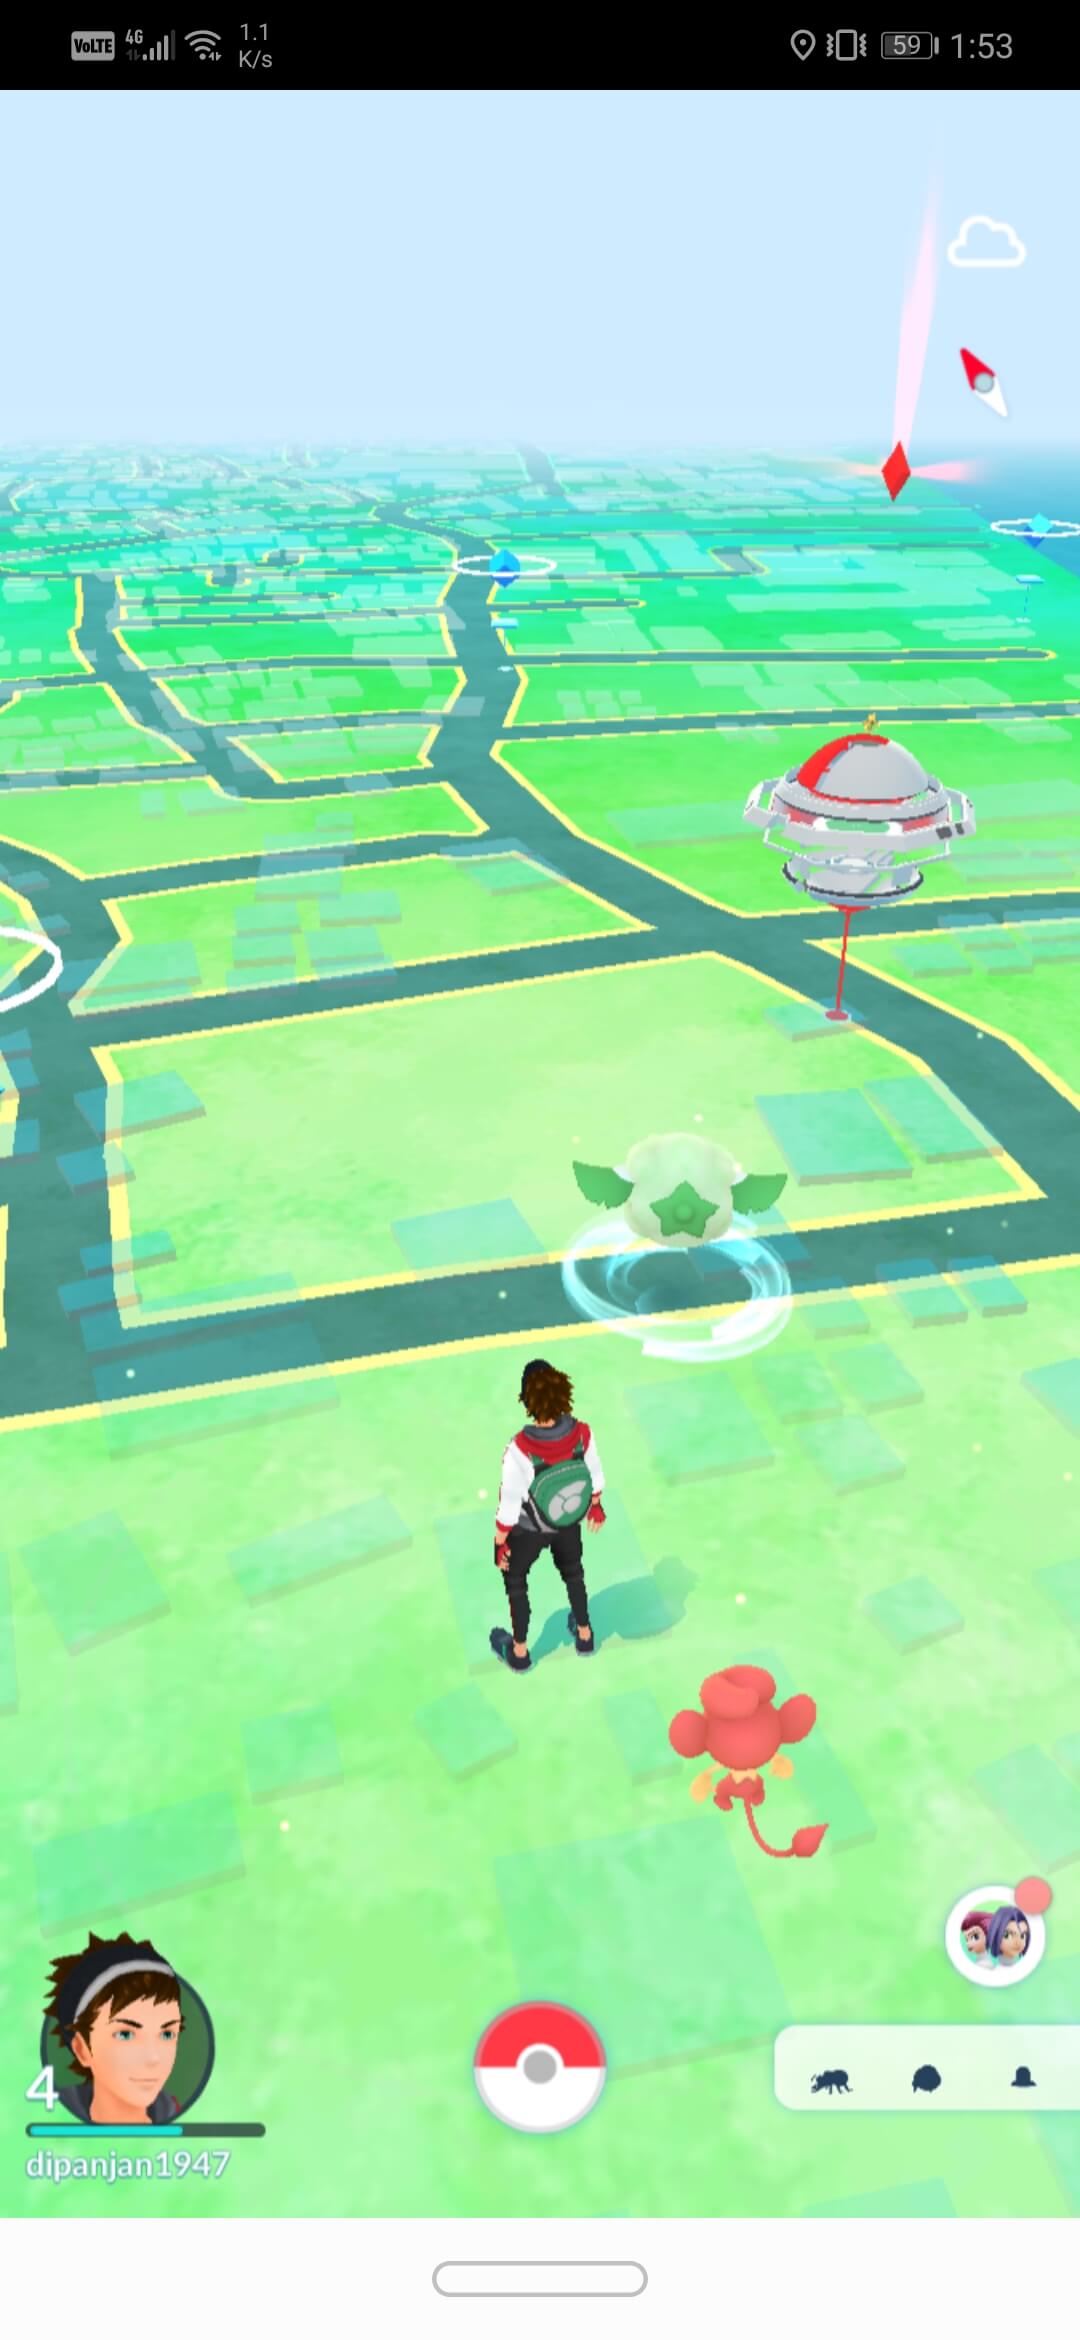 Tap on the Pokéball button at the bottom center of the screen | How To Change Pokémon Go Name After New Update